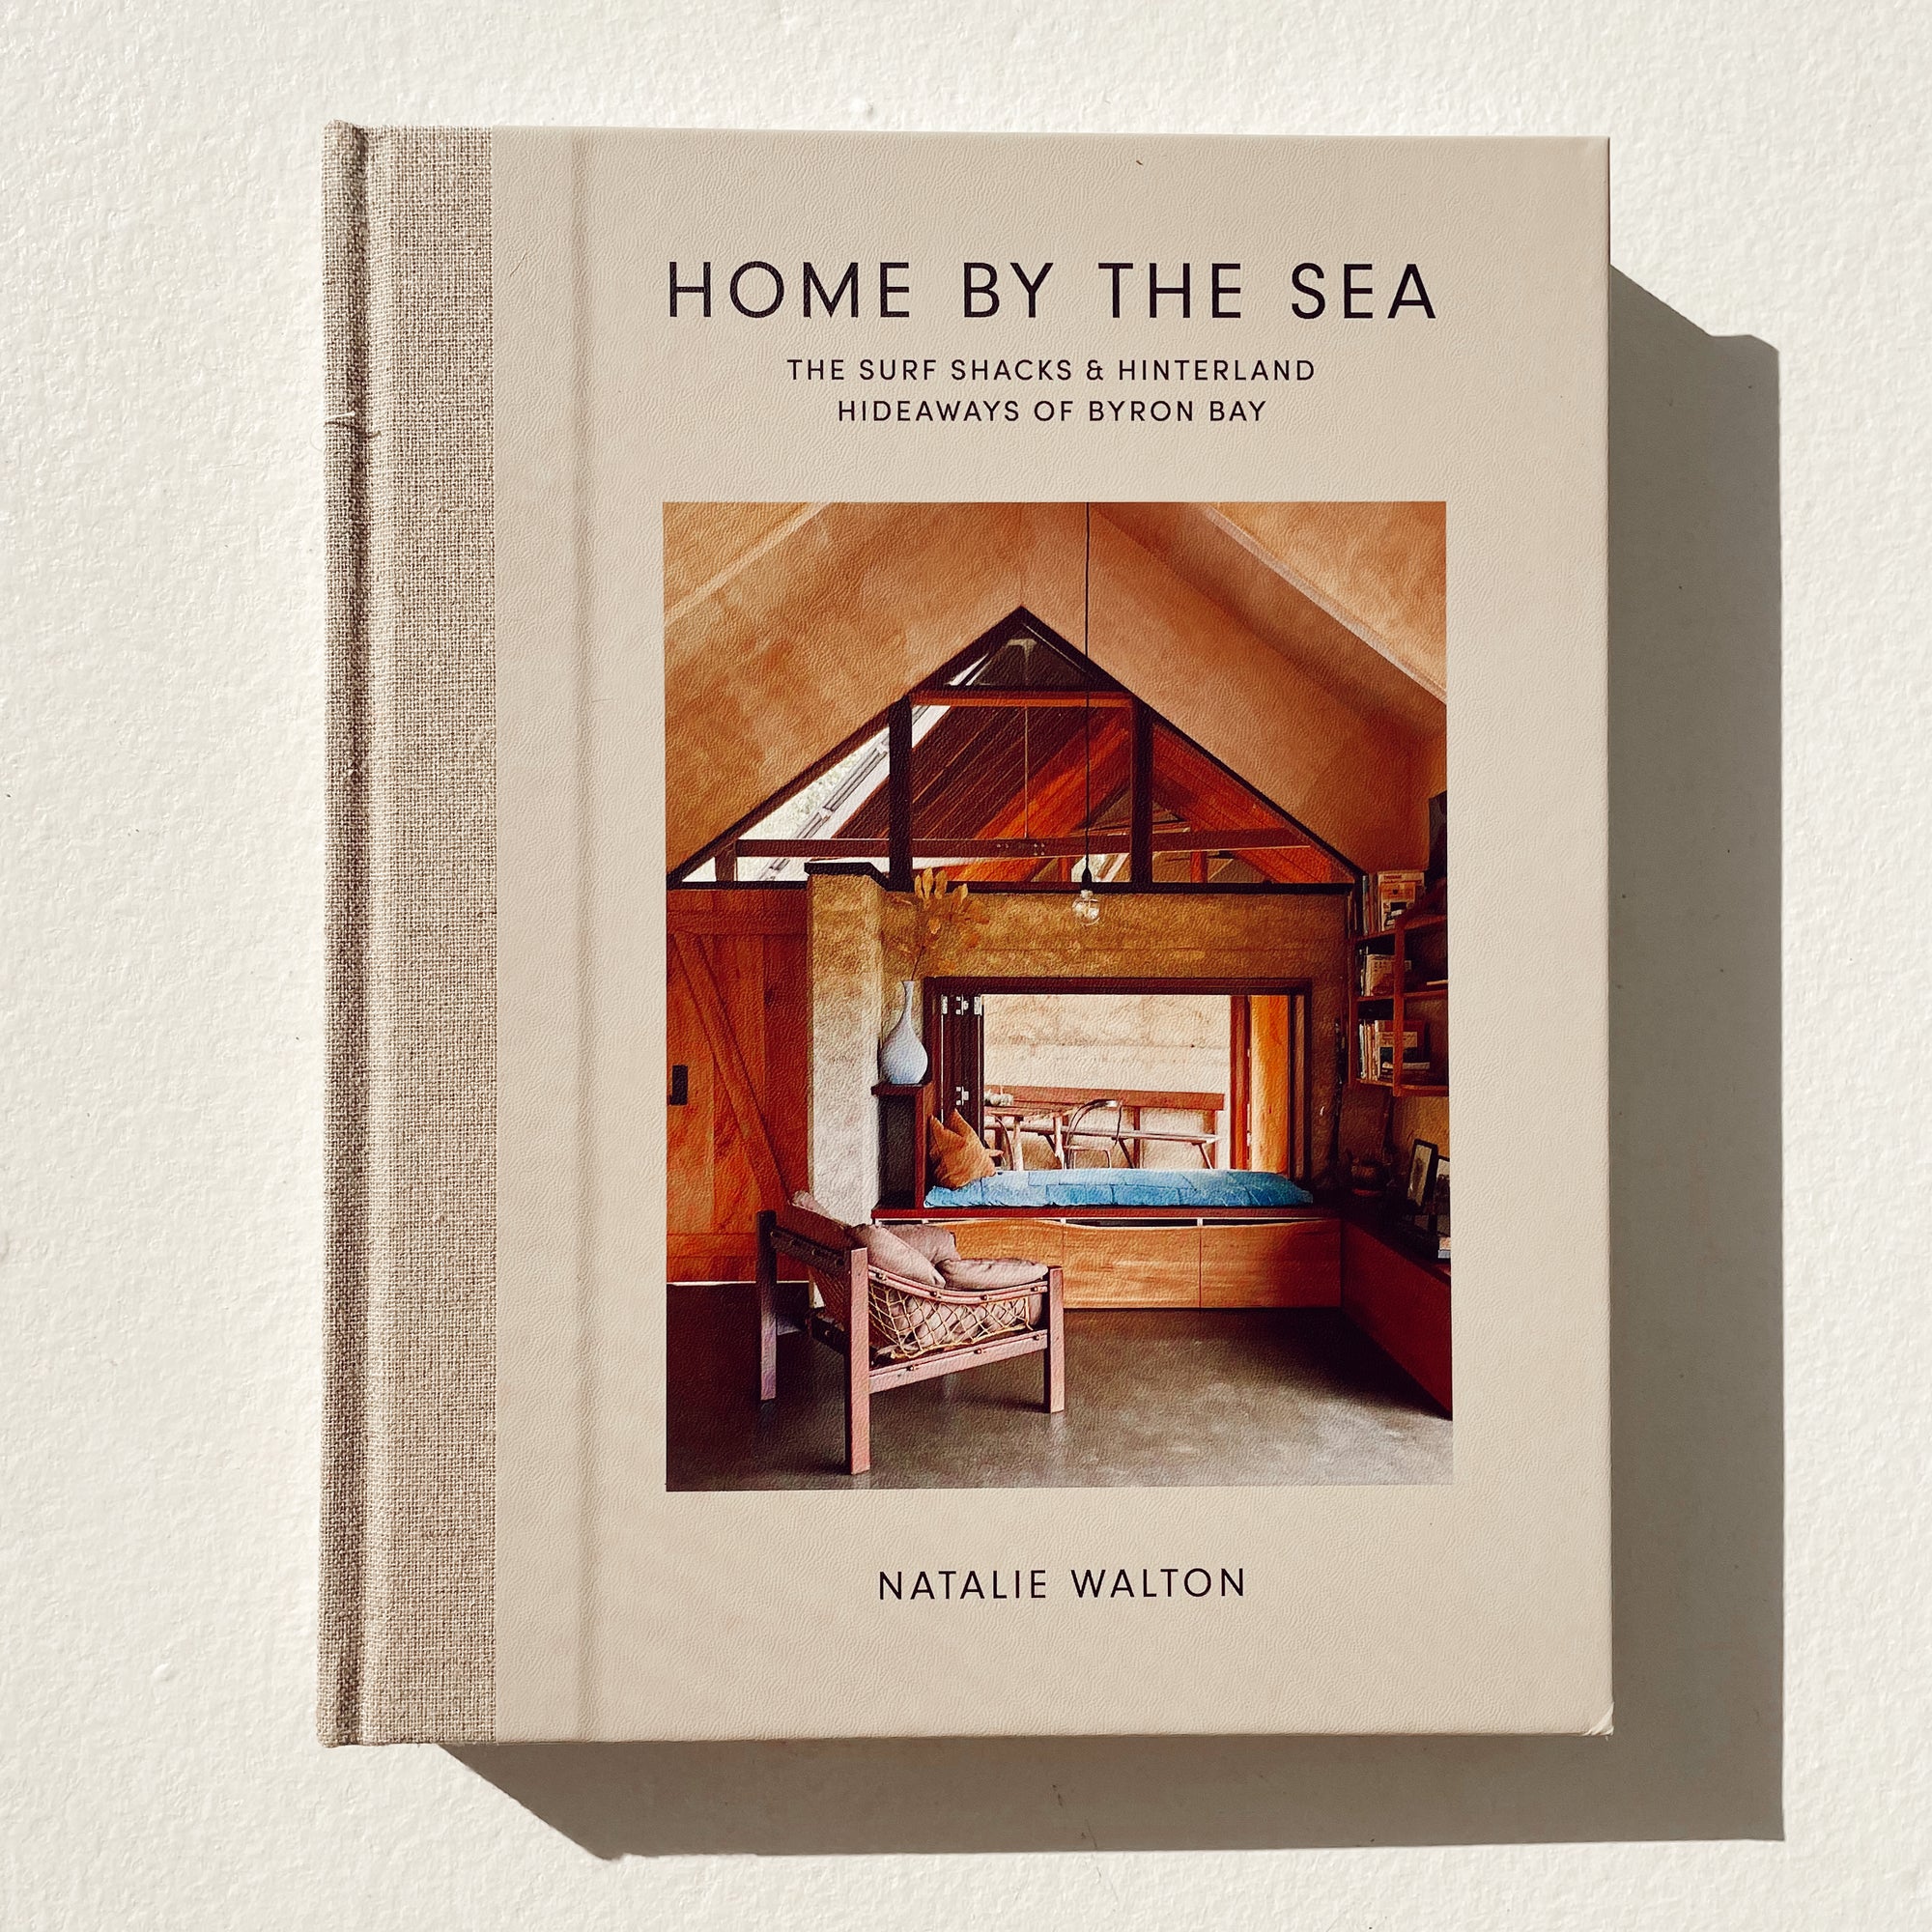 HOME BY THE SEA BY NATALIE WALTON